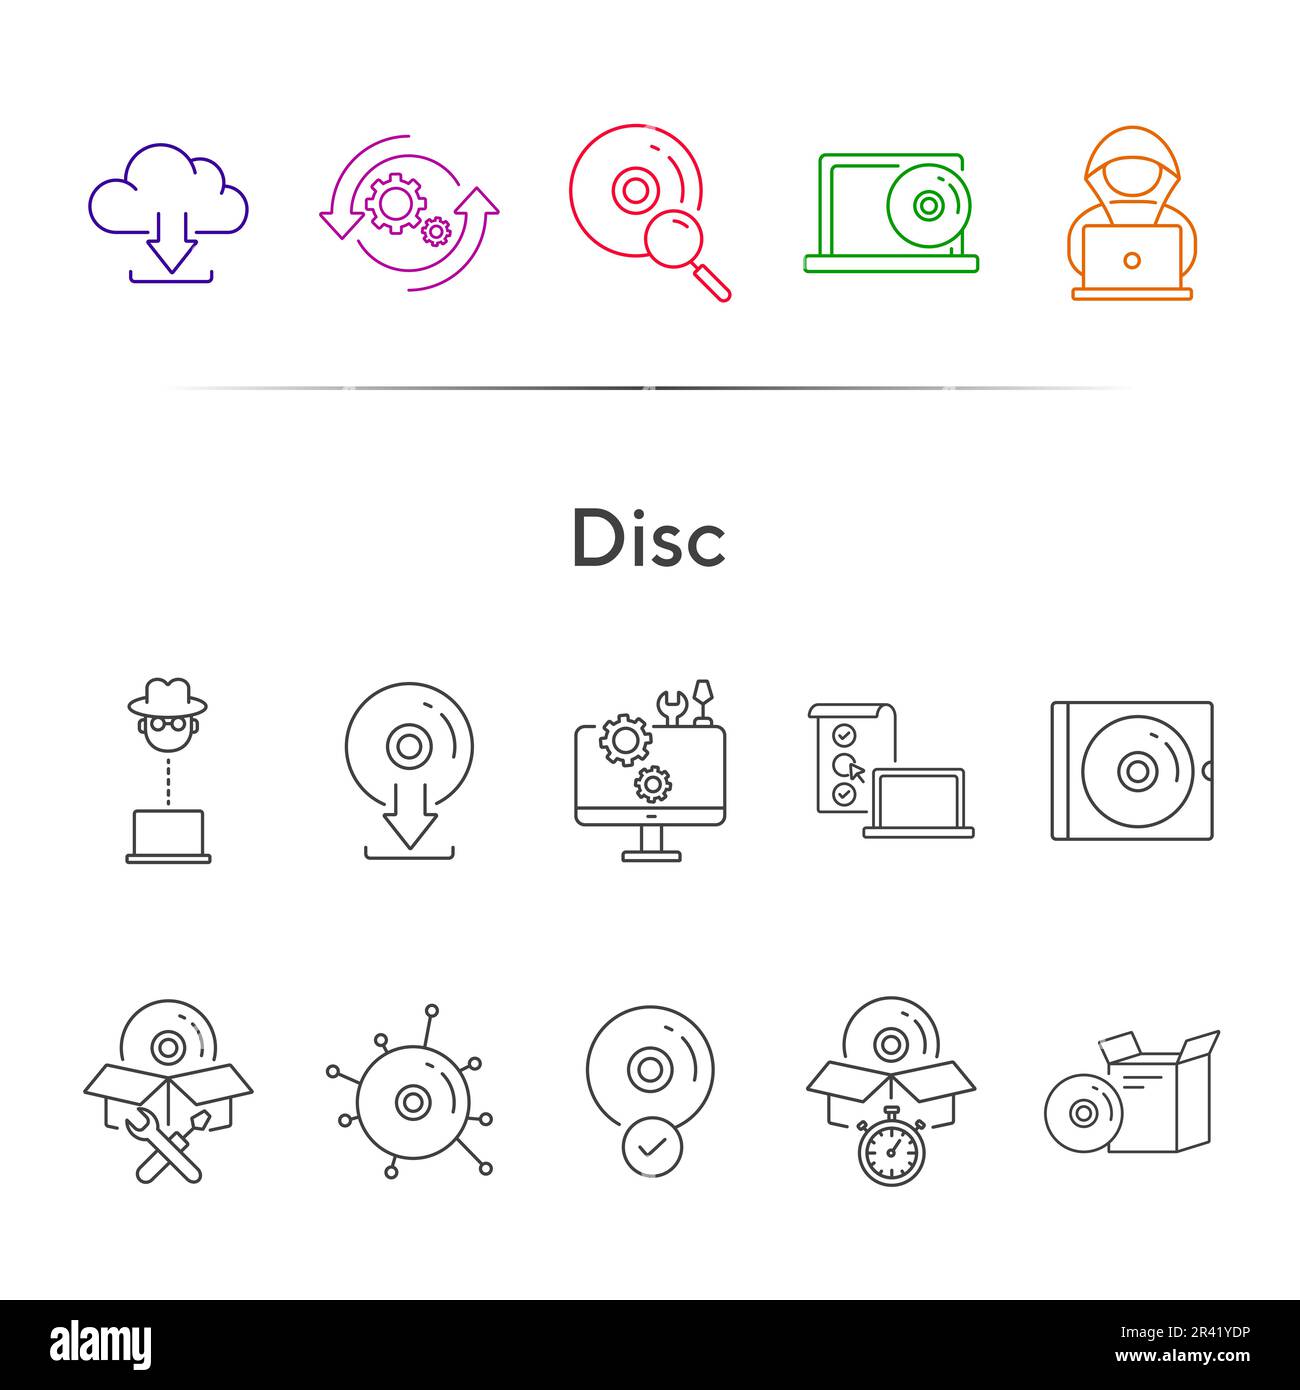 Disc icons Stock Vector